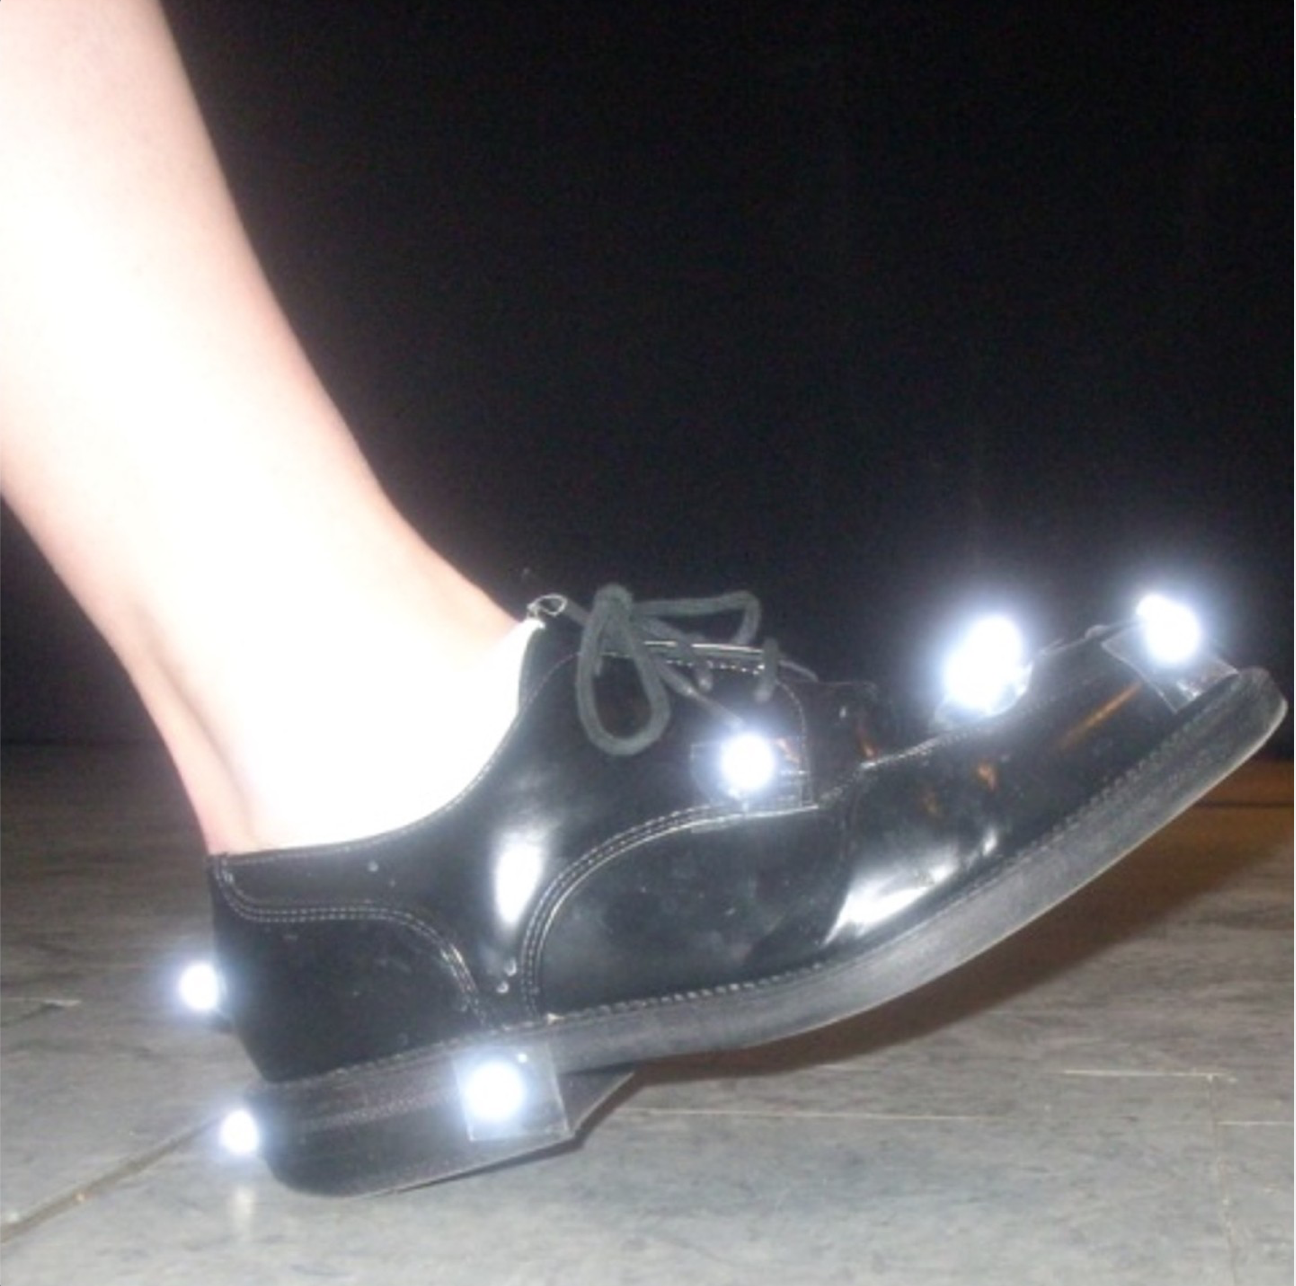 A shoe with lights